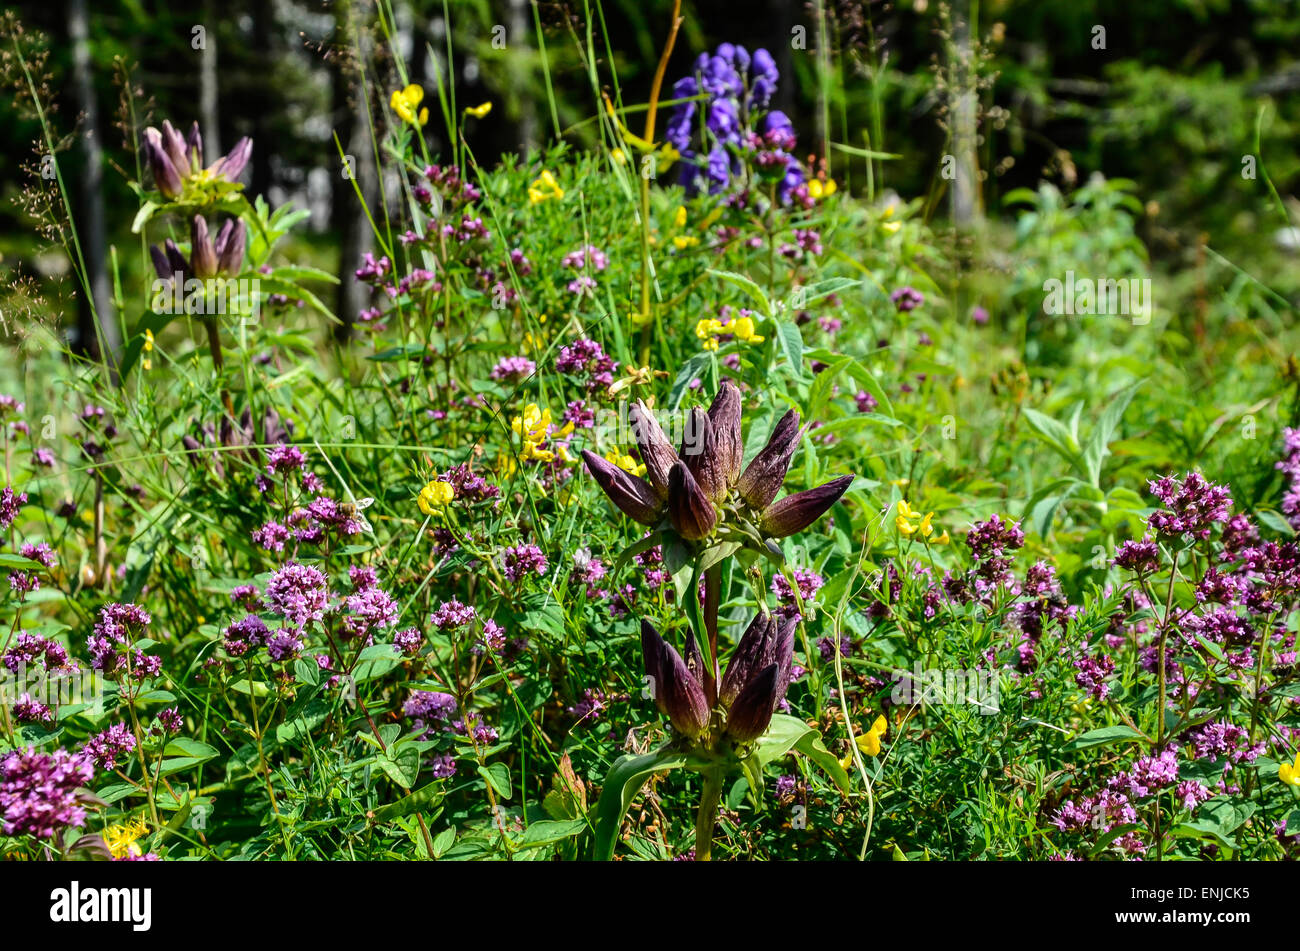 Hungarian Gentian Gentiana pannonica devil's helmet and many other wild flowers in the Alpine region of Ausseerland, Austria Stock Photo